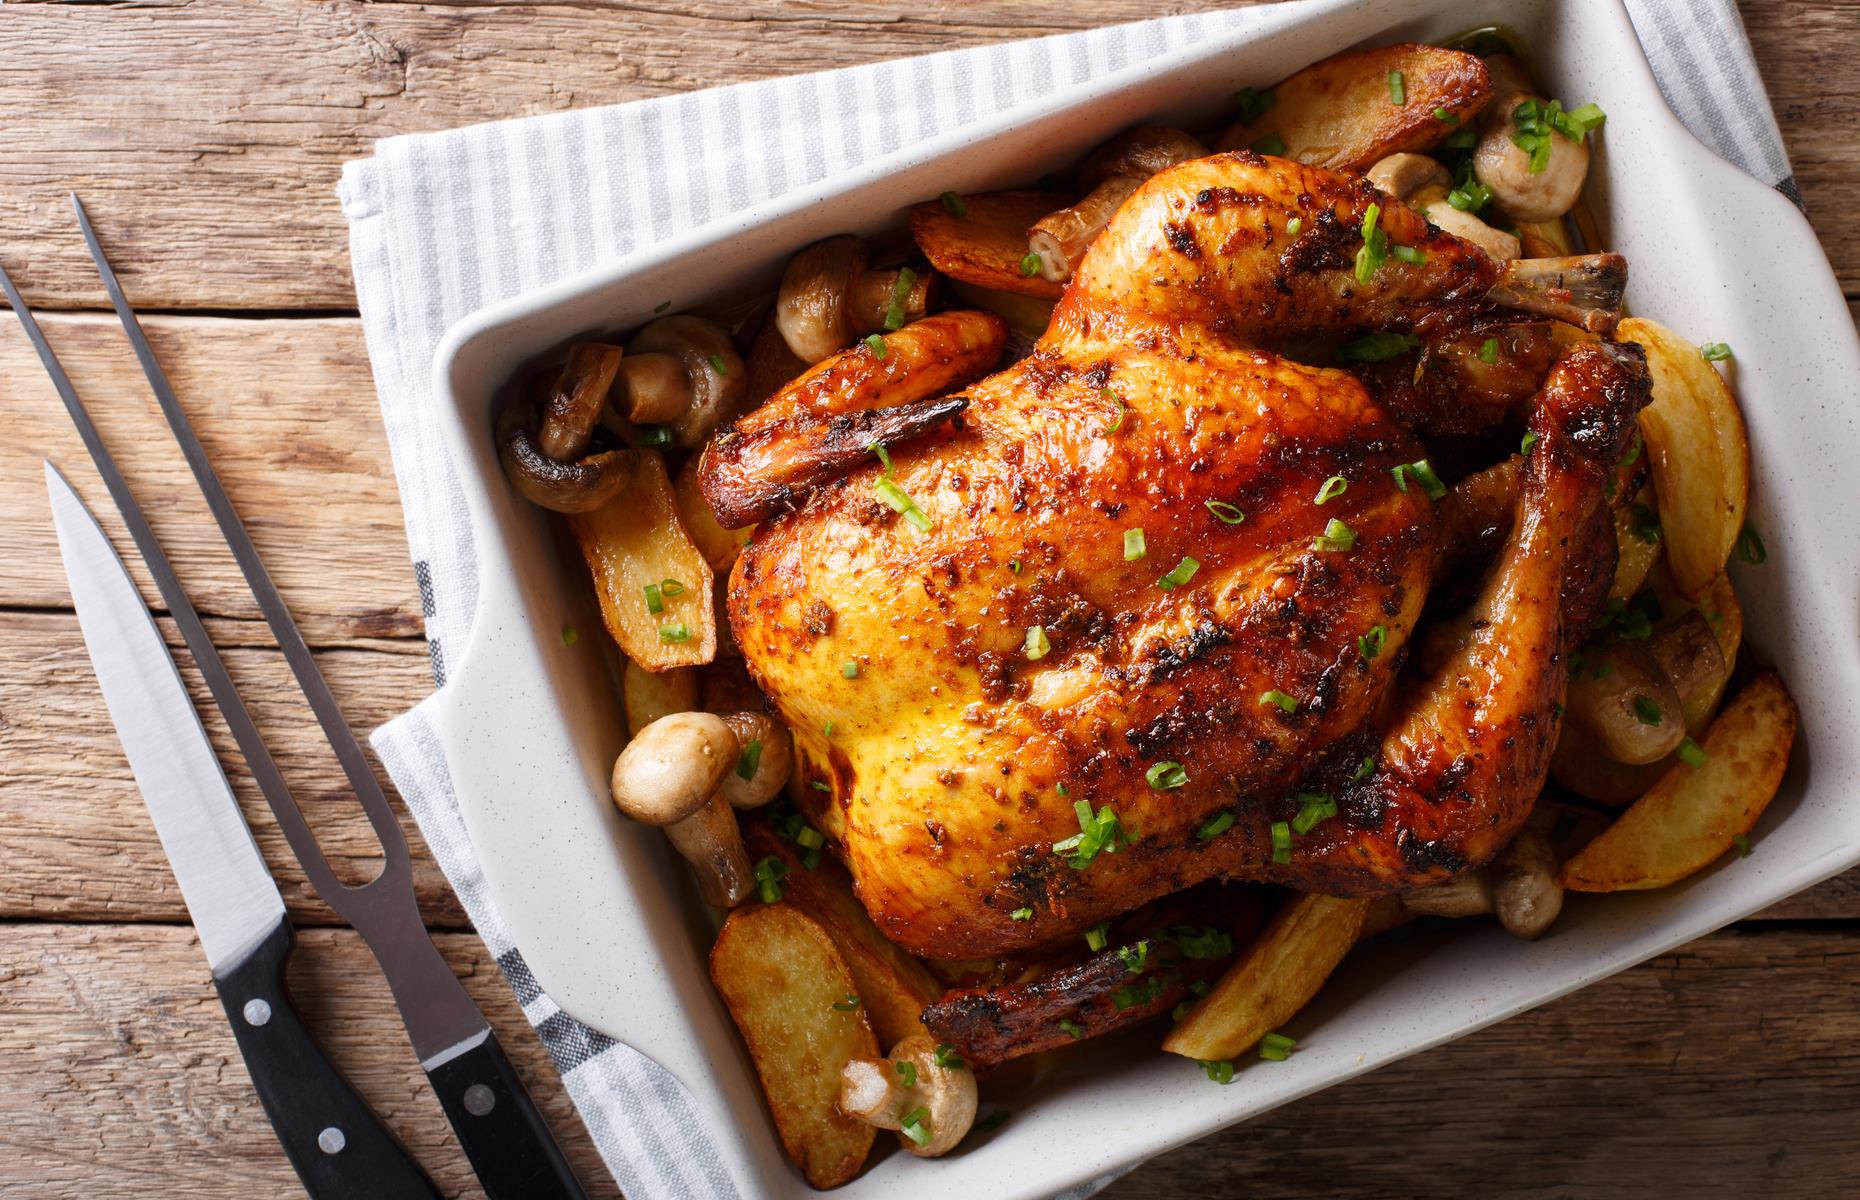 <p>Schmaltz is the Yiddish word for chicken or goose fat. For perfectly crisp roast chicken skin, Nigella suggests you take the nugget of fat out of the cavity of the chicken, render it down to a liquid in a small saucepan, then brush it over the bird before cooking.</p>